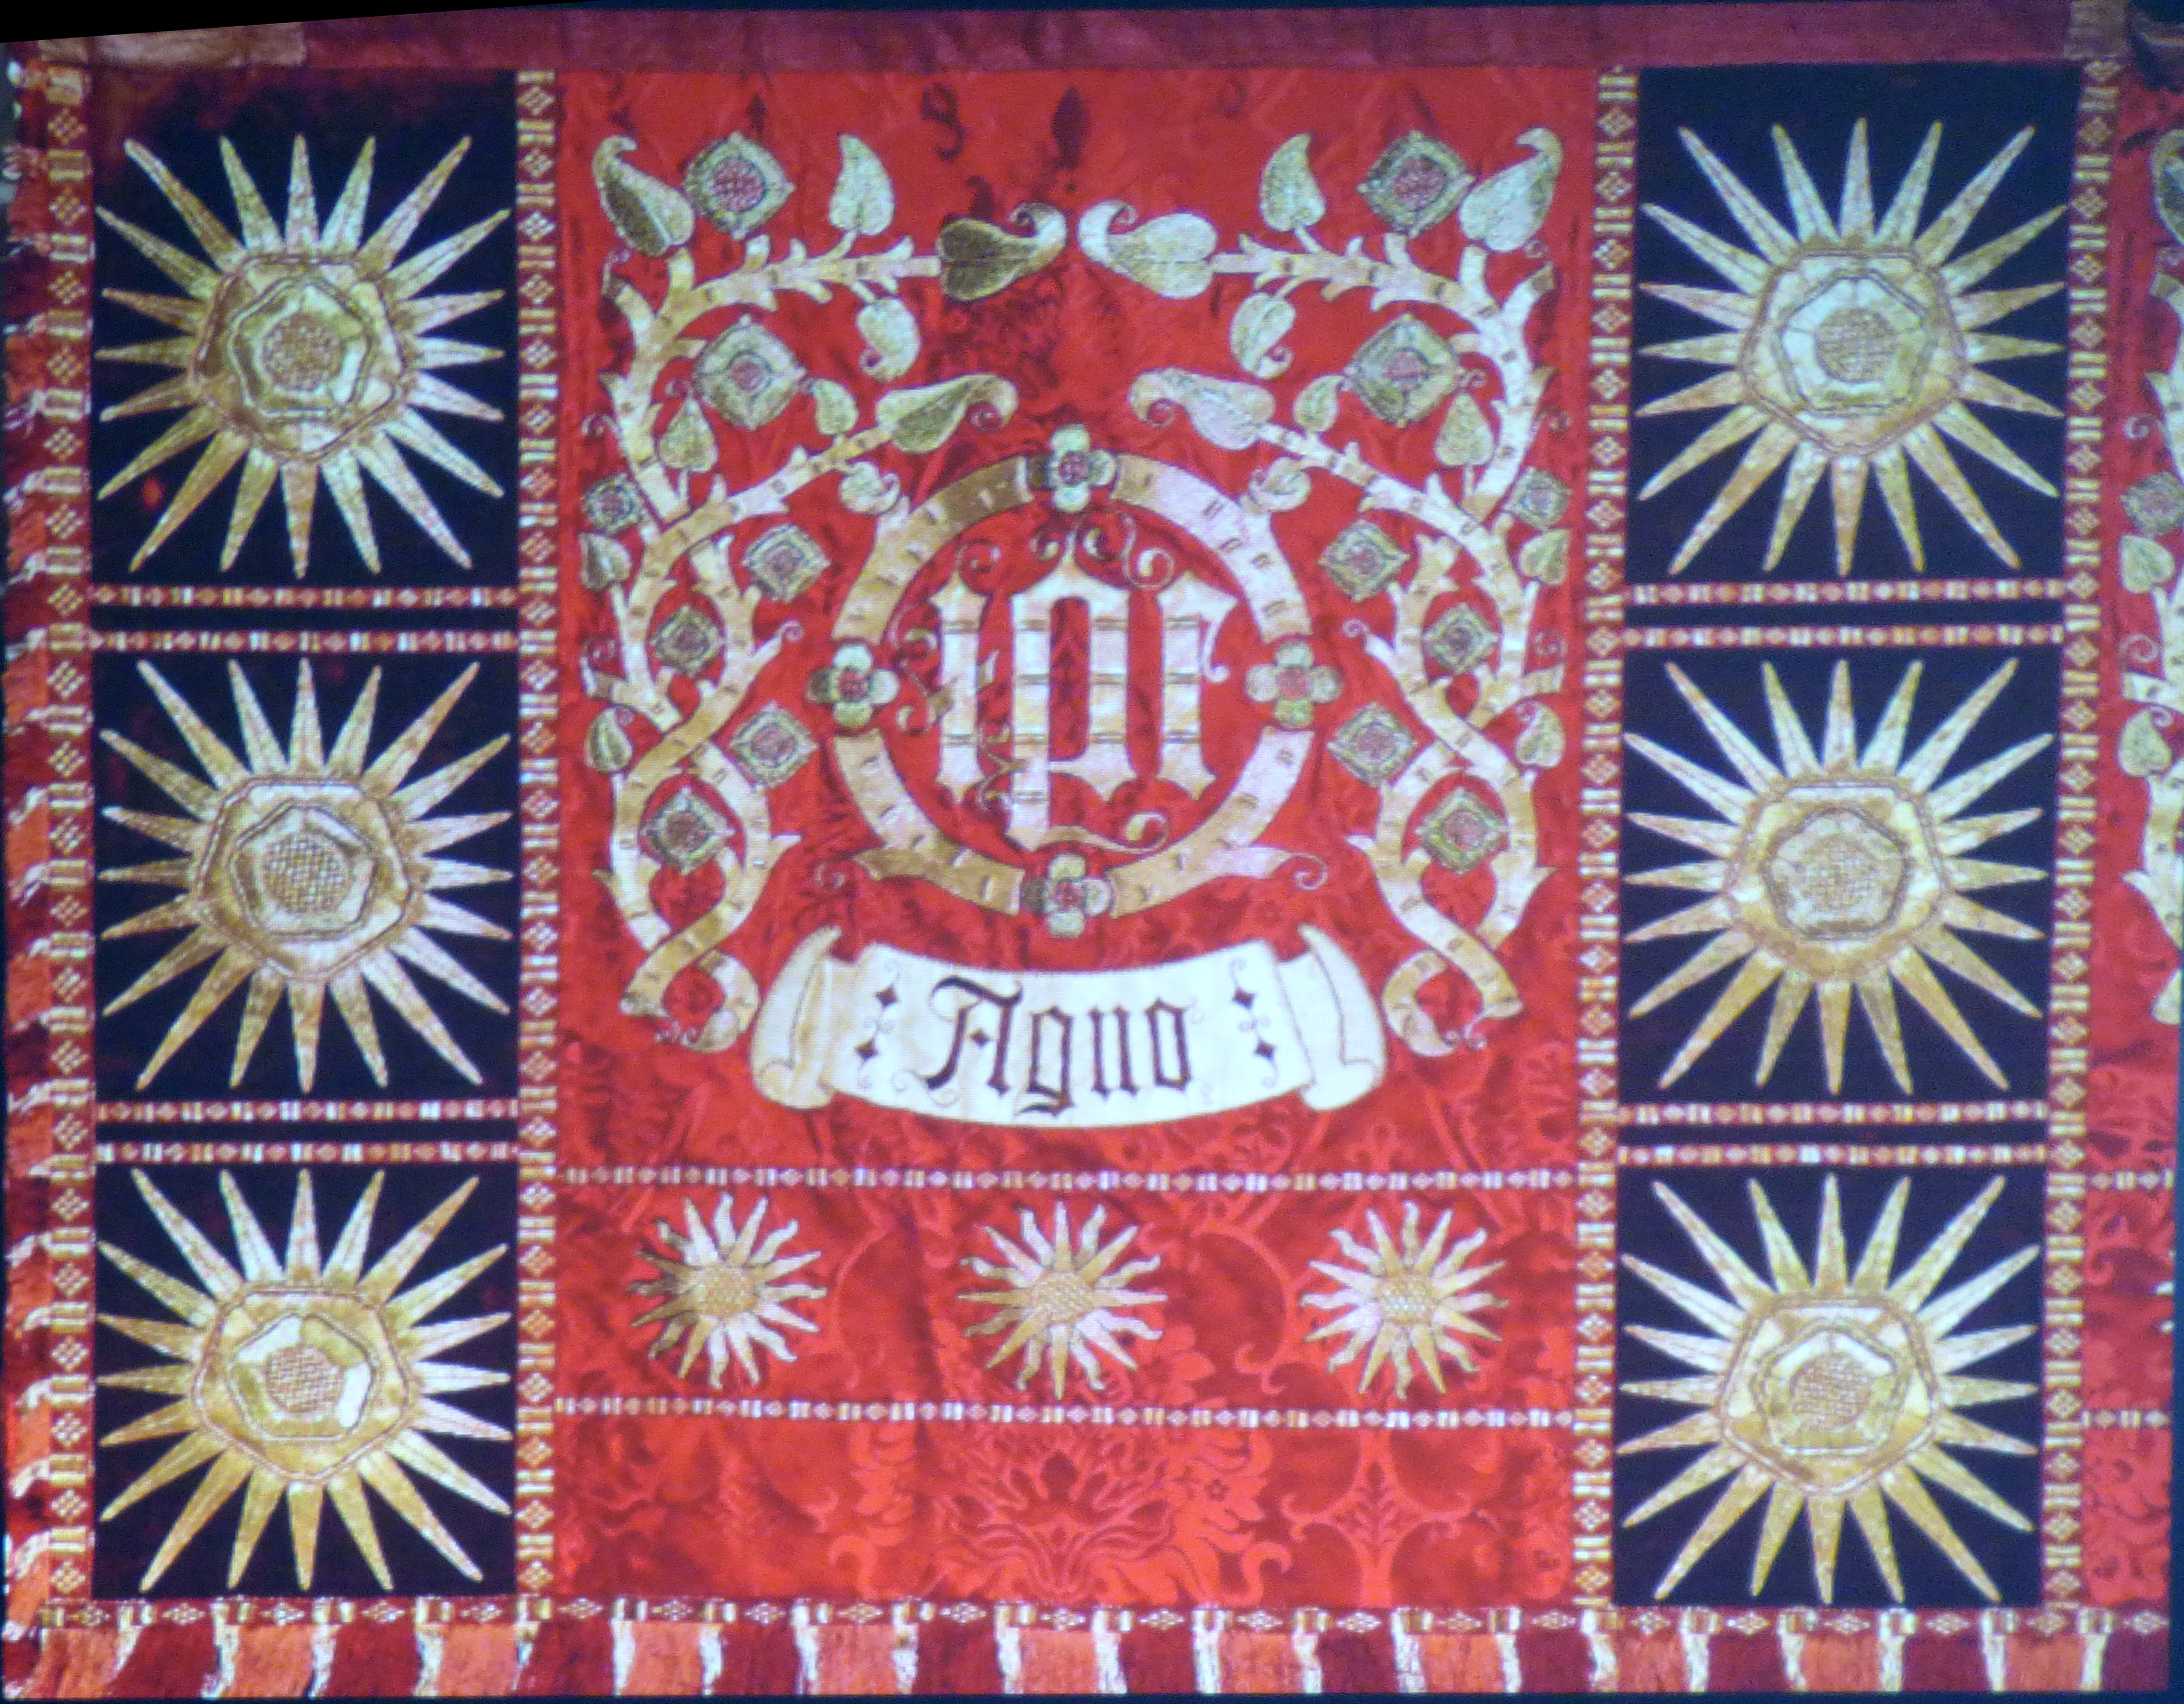 (detail) (detail) slide showing Red Frontal, Liverpool Cathedral embroideries Talk by Vicky Williams 2019